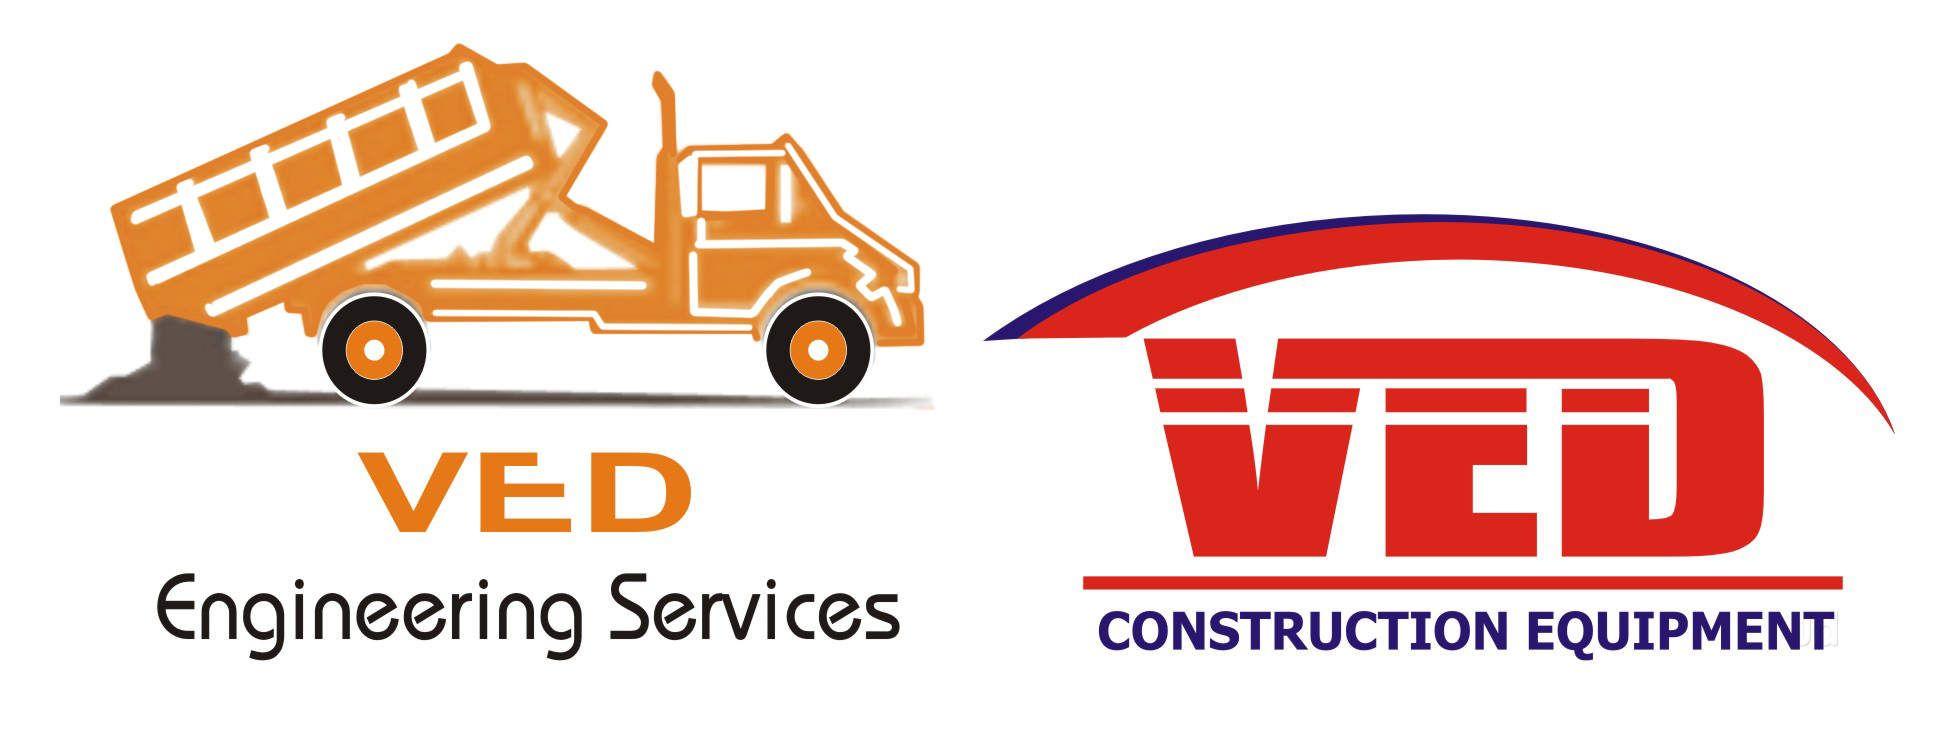 Ved Logo - Ved Construction Equipment Photos, Imamwada, Nagpur- Pictures ...